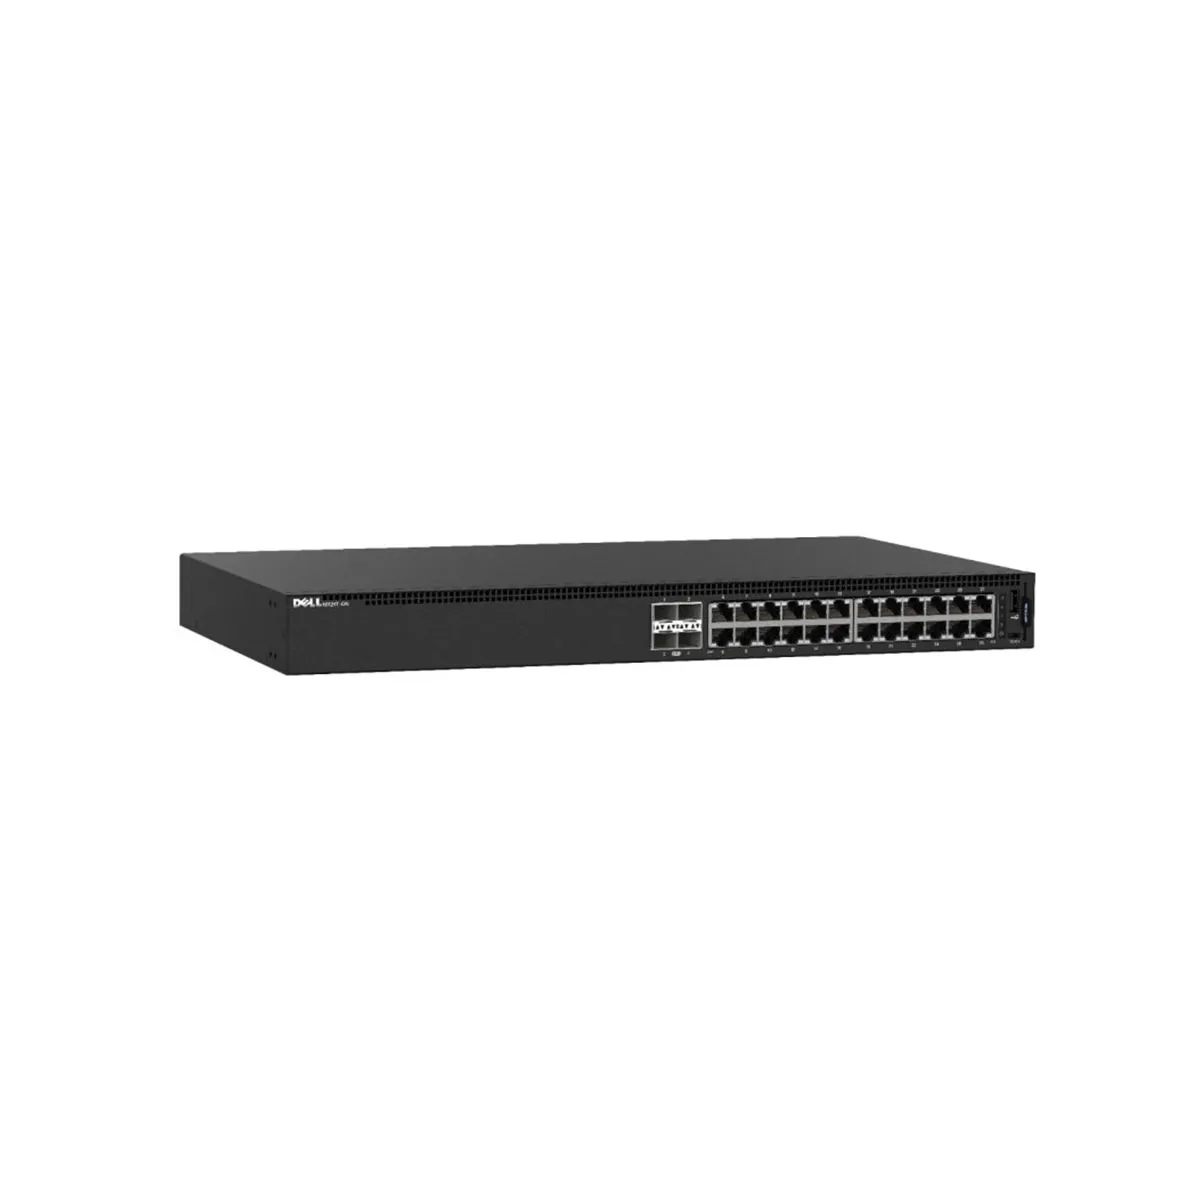 Dell PowerSwitch N1124P-ON - 24xRJ-45 1Gbps 4xSFP+ 10Gbps PoE+ Managed Switch (inc. Ears)